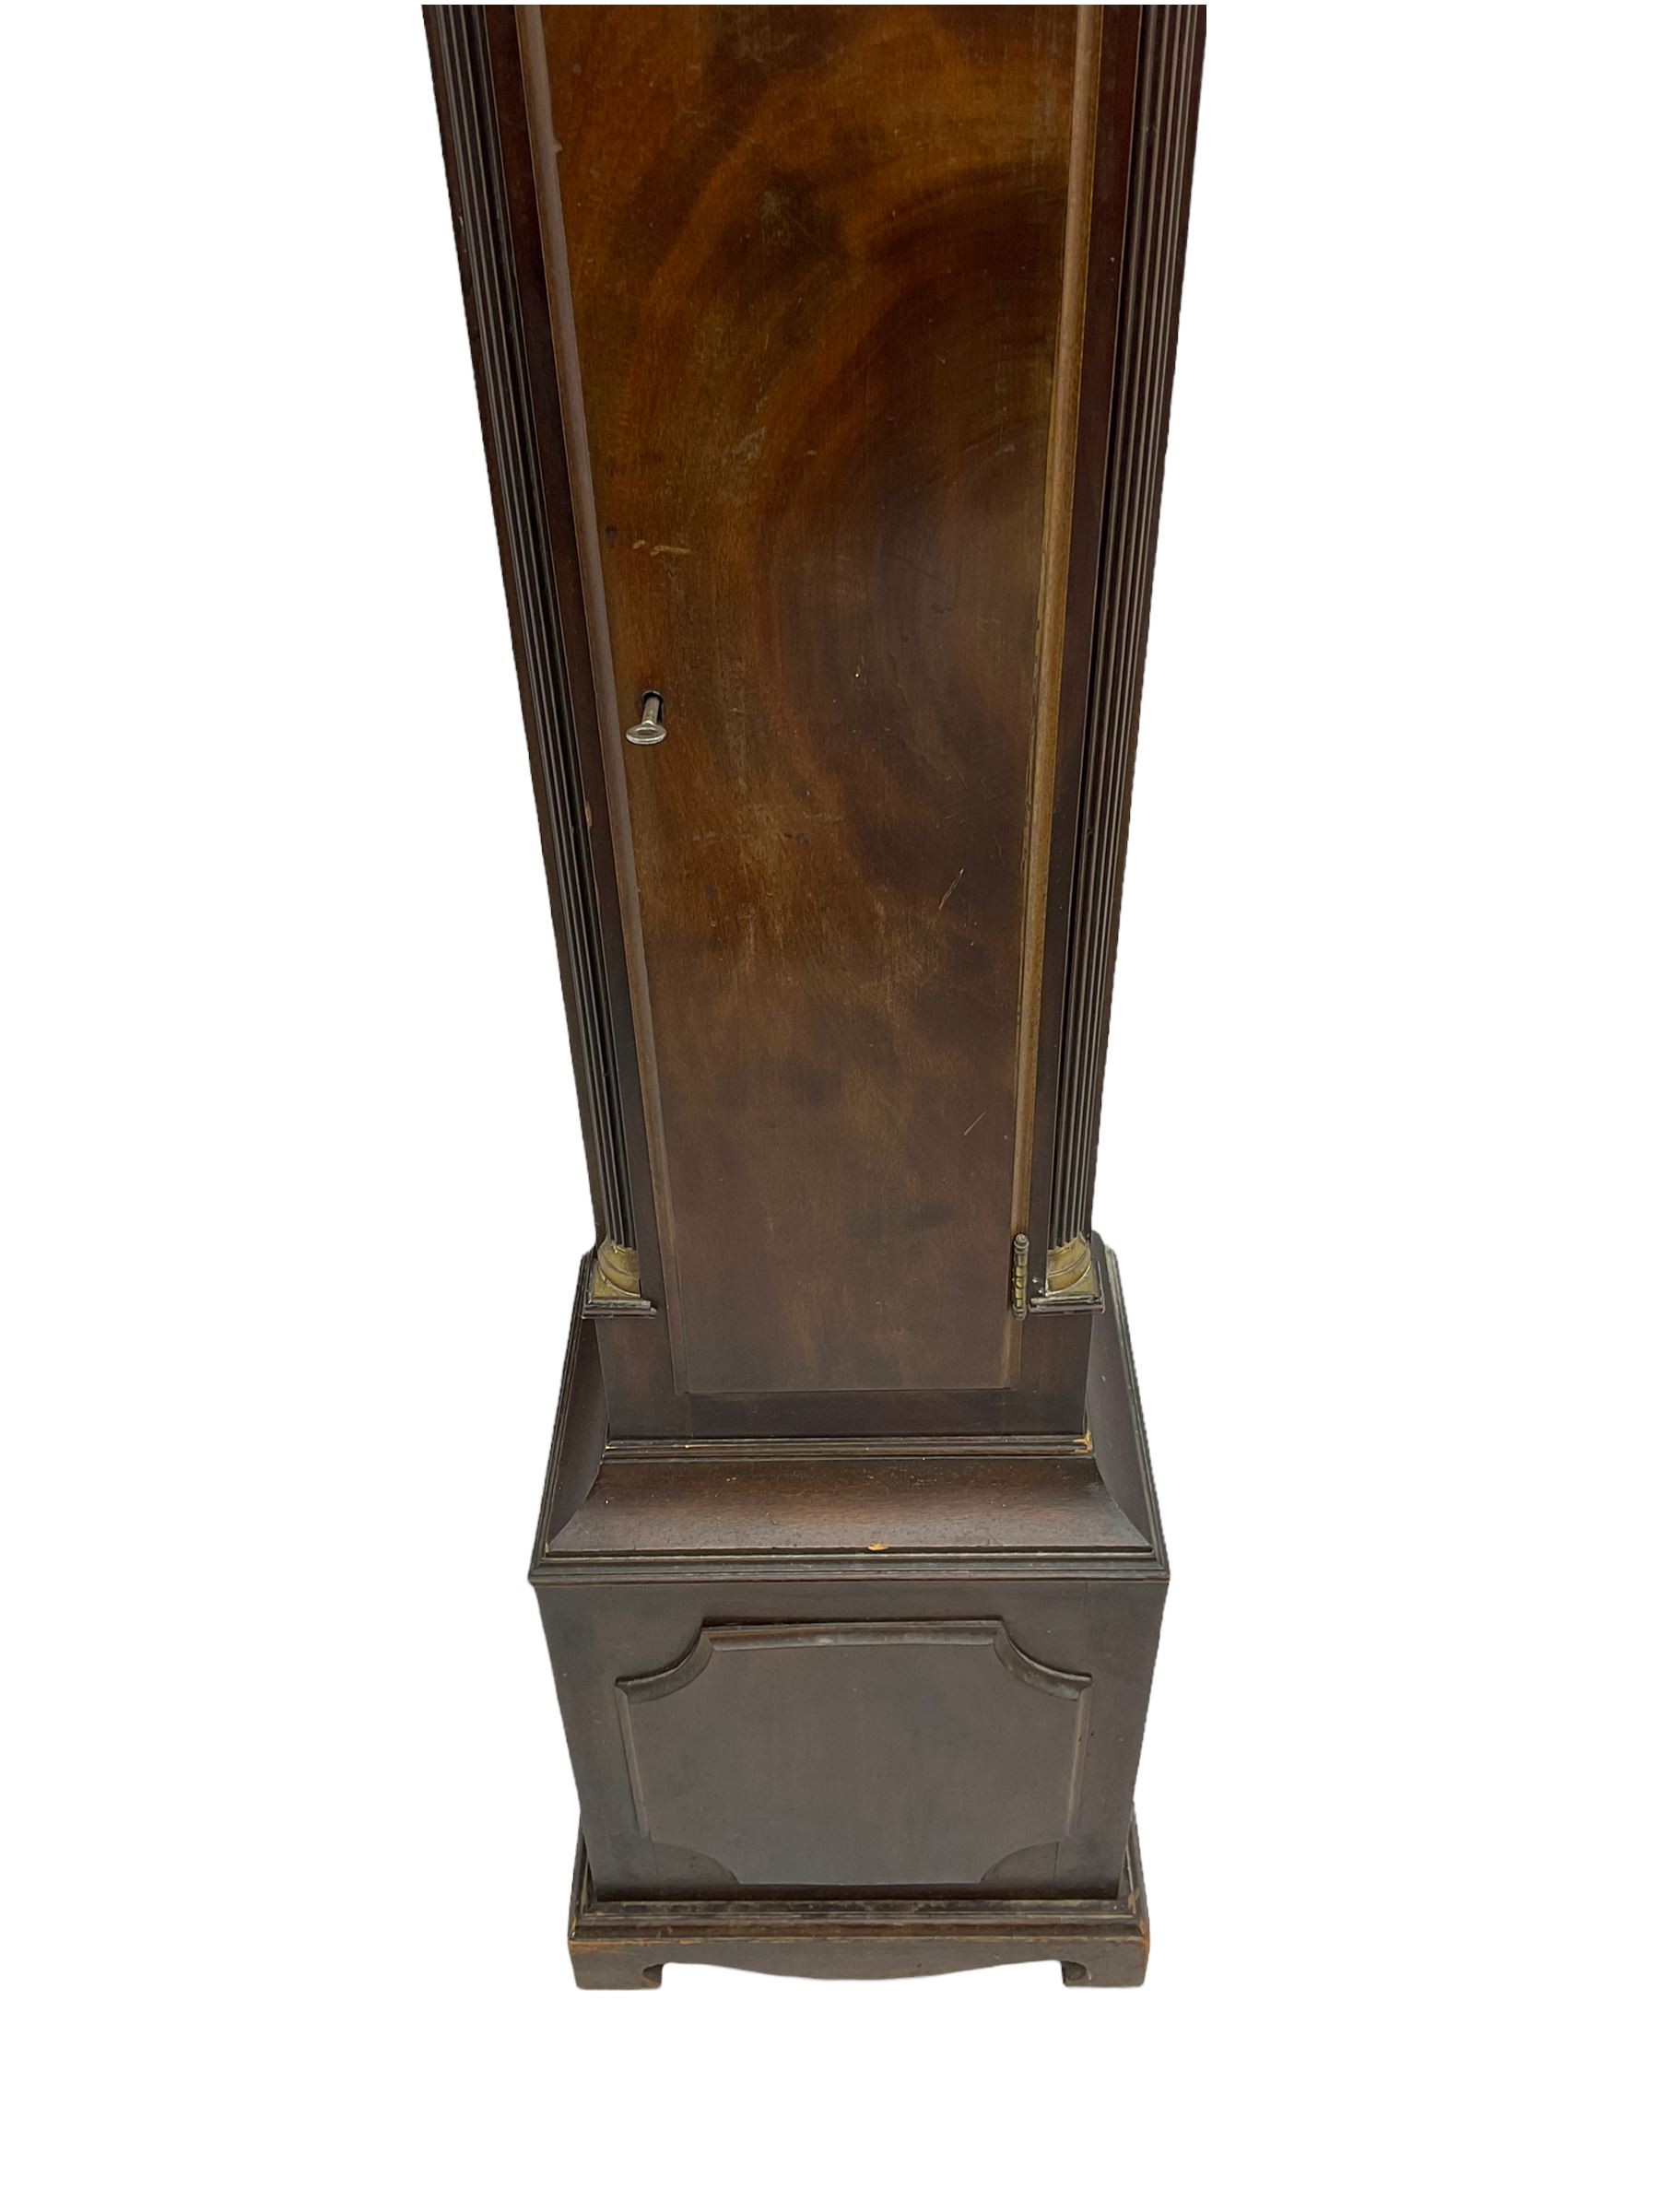 A compact mid-20th century �Grandmother� clock in a replica Georgian styled case c1950 - Image 3 of 4